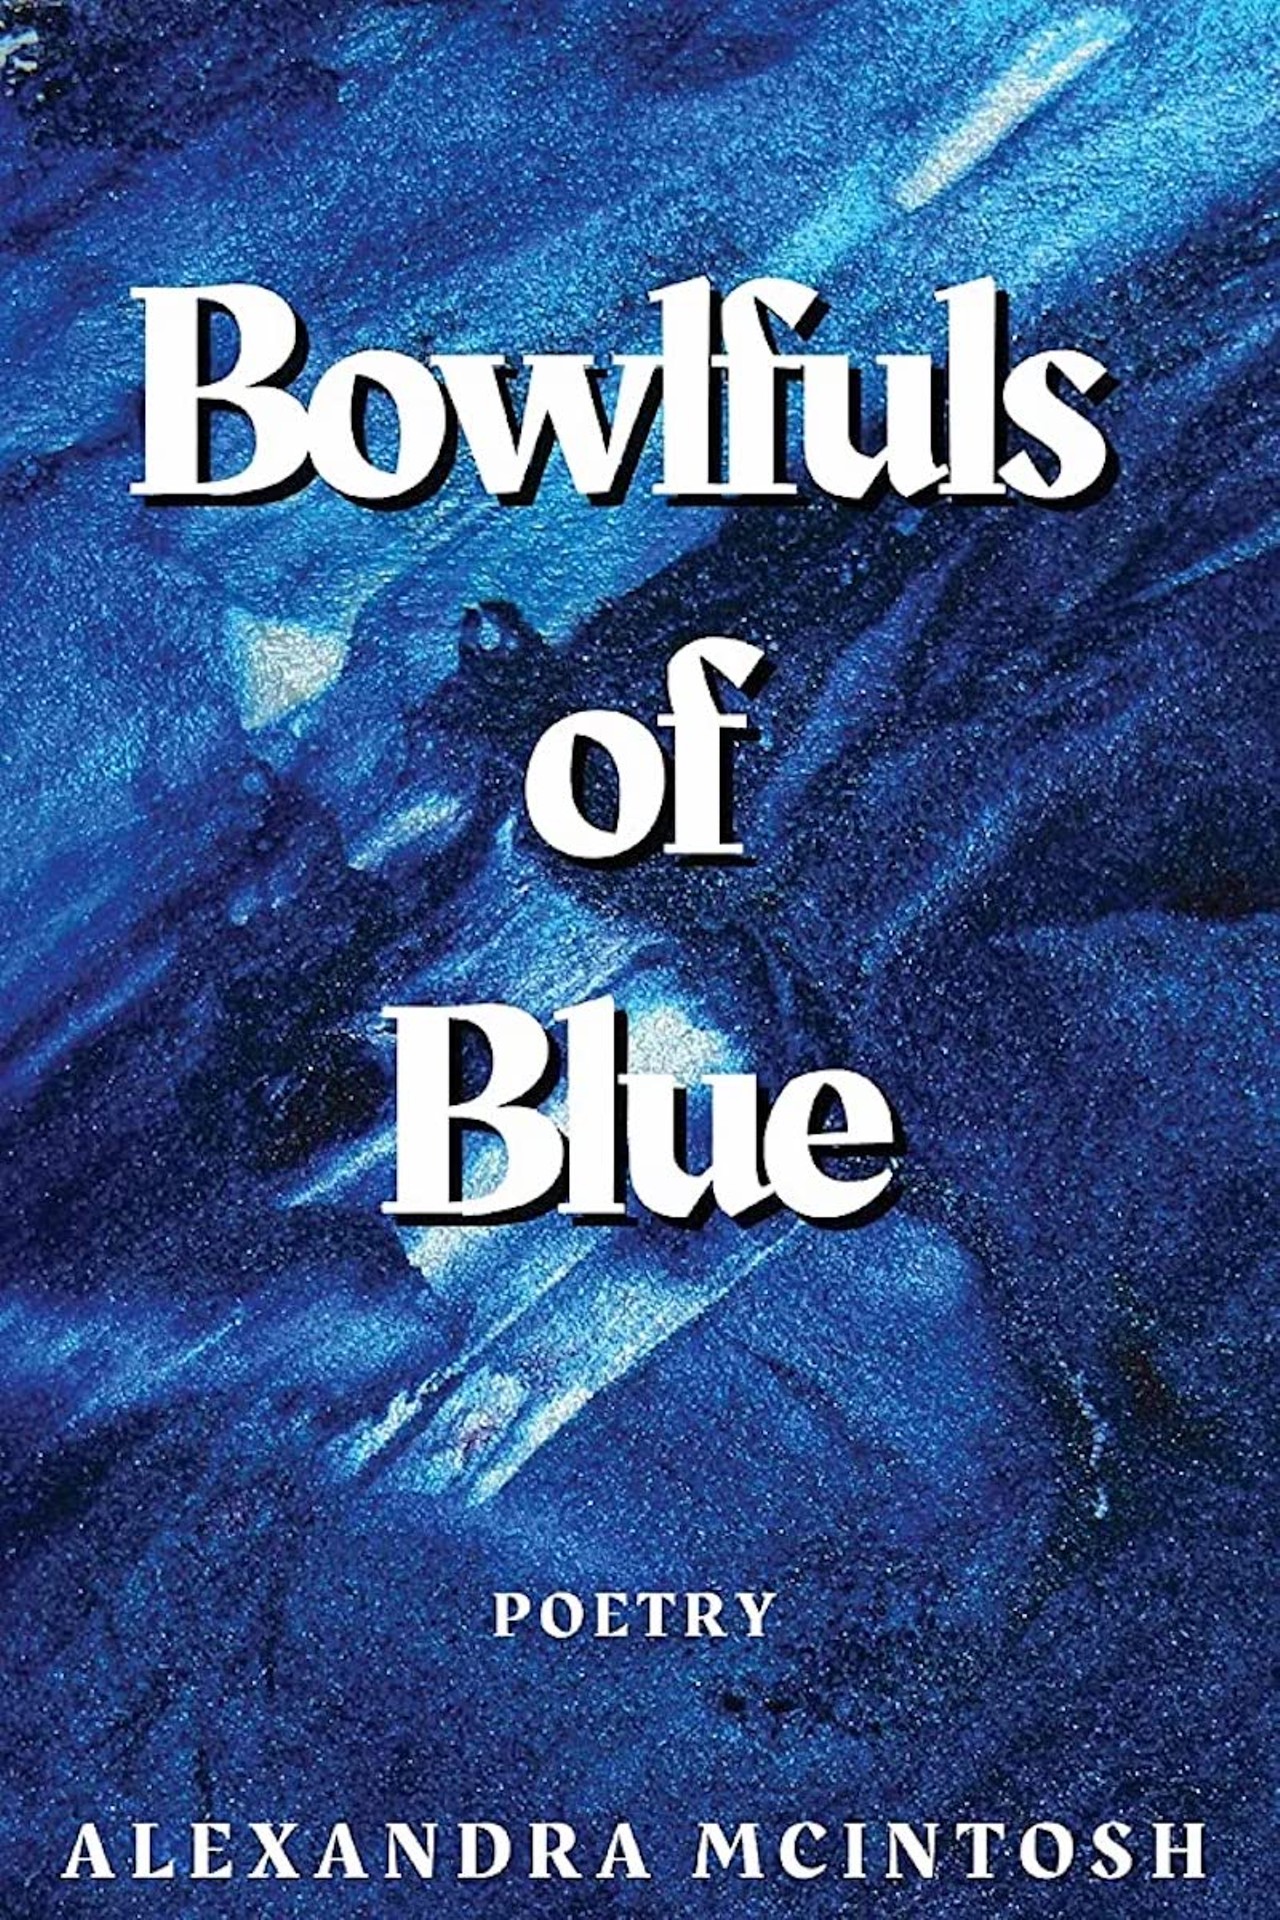 Bowlfuls of Blue by Alexandra McIntosh
What better time of year to ponder nature’s wonder than summer? Bowlfuls of Blue marks Kentucky native Alexandra McIntosh’s first collection of poems. In it, McIntosh weaves together meditations and reflections not only on core moments from her personal life but on nature itself, from the Kentucky and Ohio River Valley to the cosmos above.